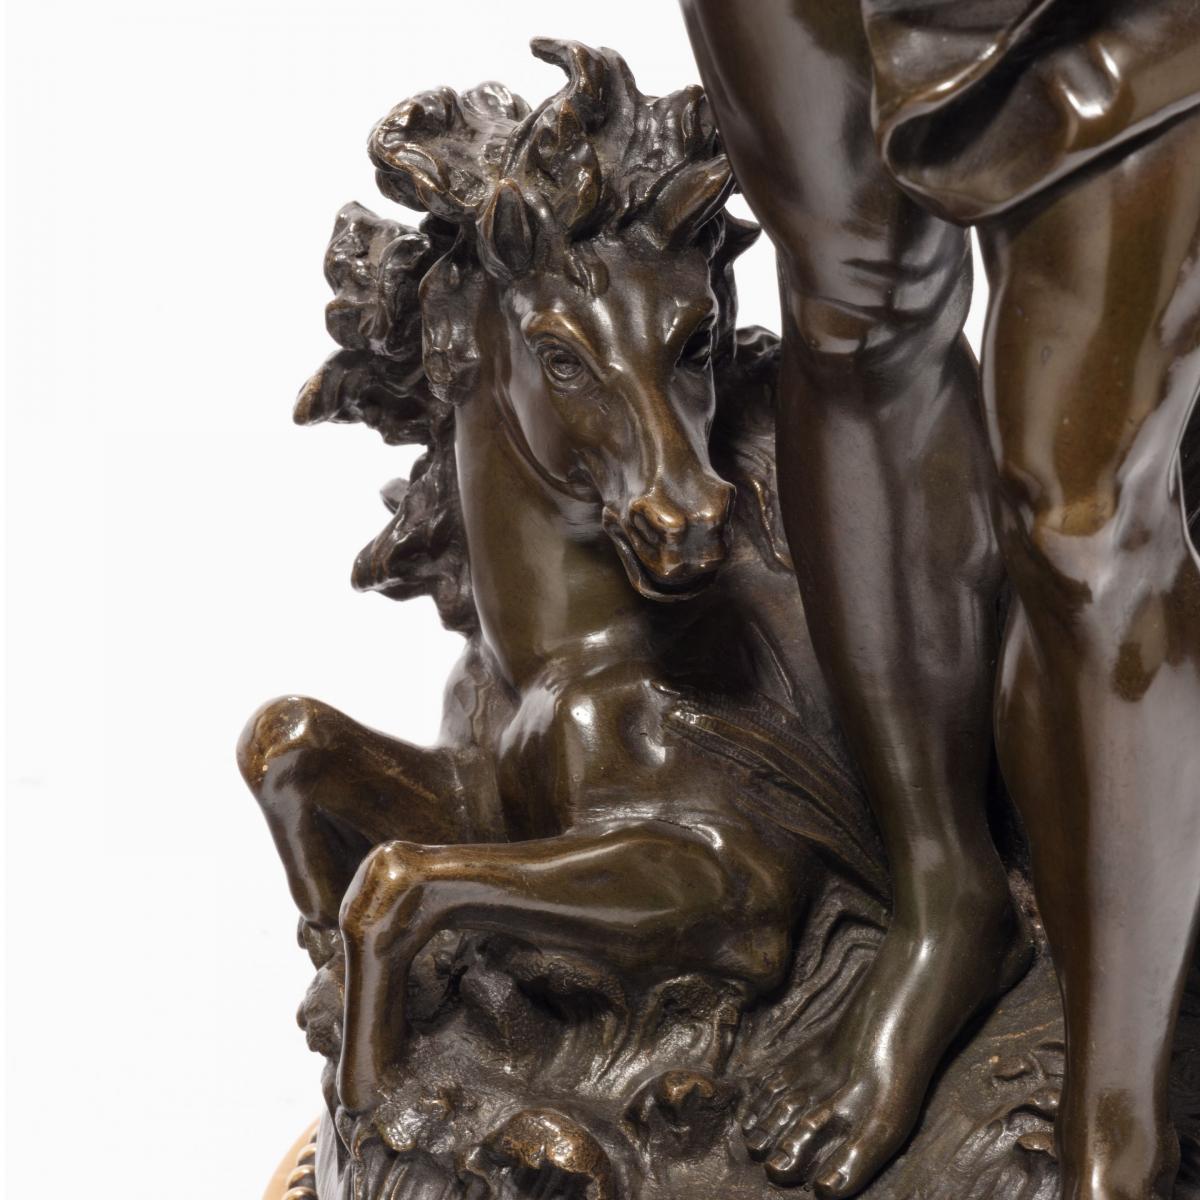 pair of bronzes depicting Poseidon (Neptune) and Amphitrite by the Moreau Atelier